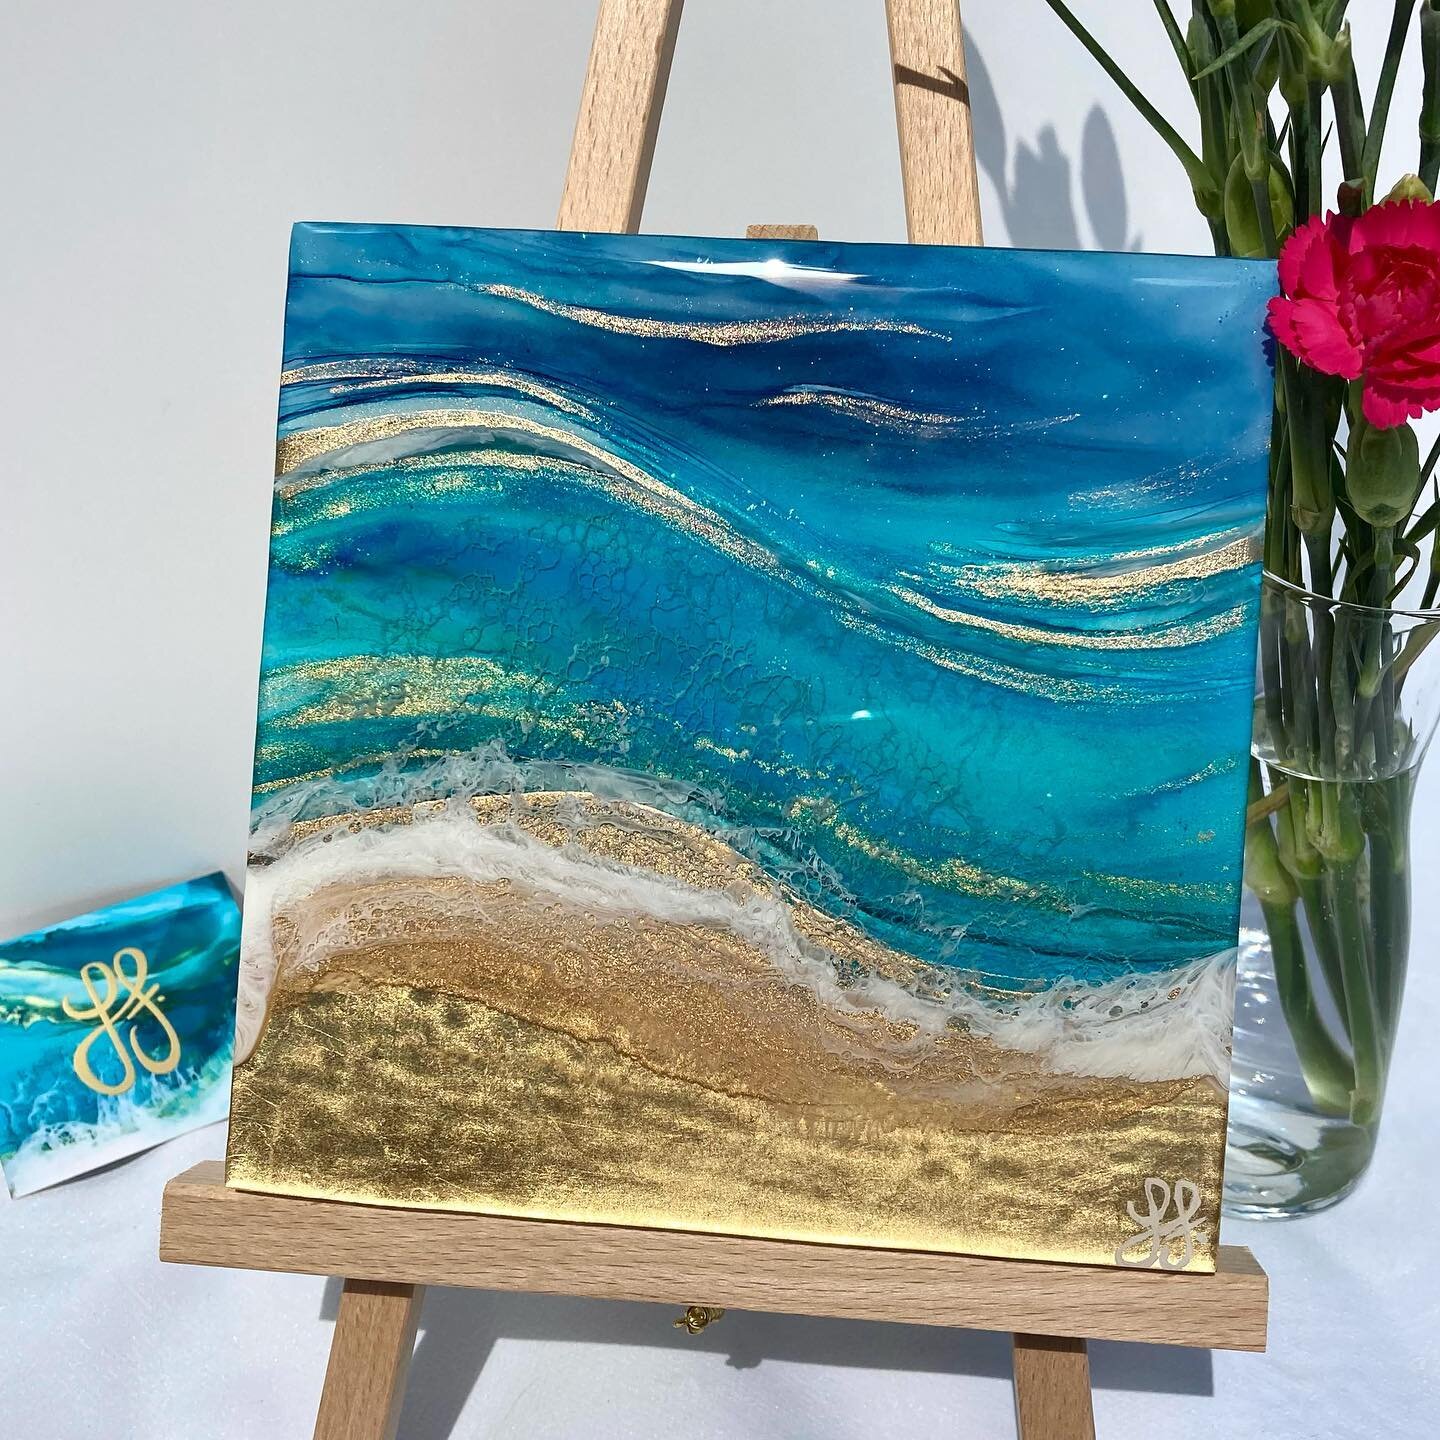 A little mini beach 🌊🥰 (sold)

It&rsquo;s been an amazing feeling the last few days receiving beautiful messages from people who purchased art from my weekend shop update 🥰

I received this lovely message from a special collector who has supported